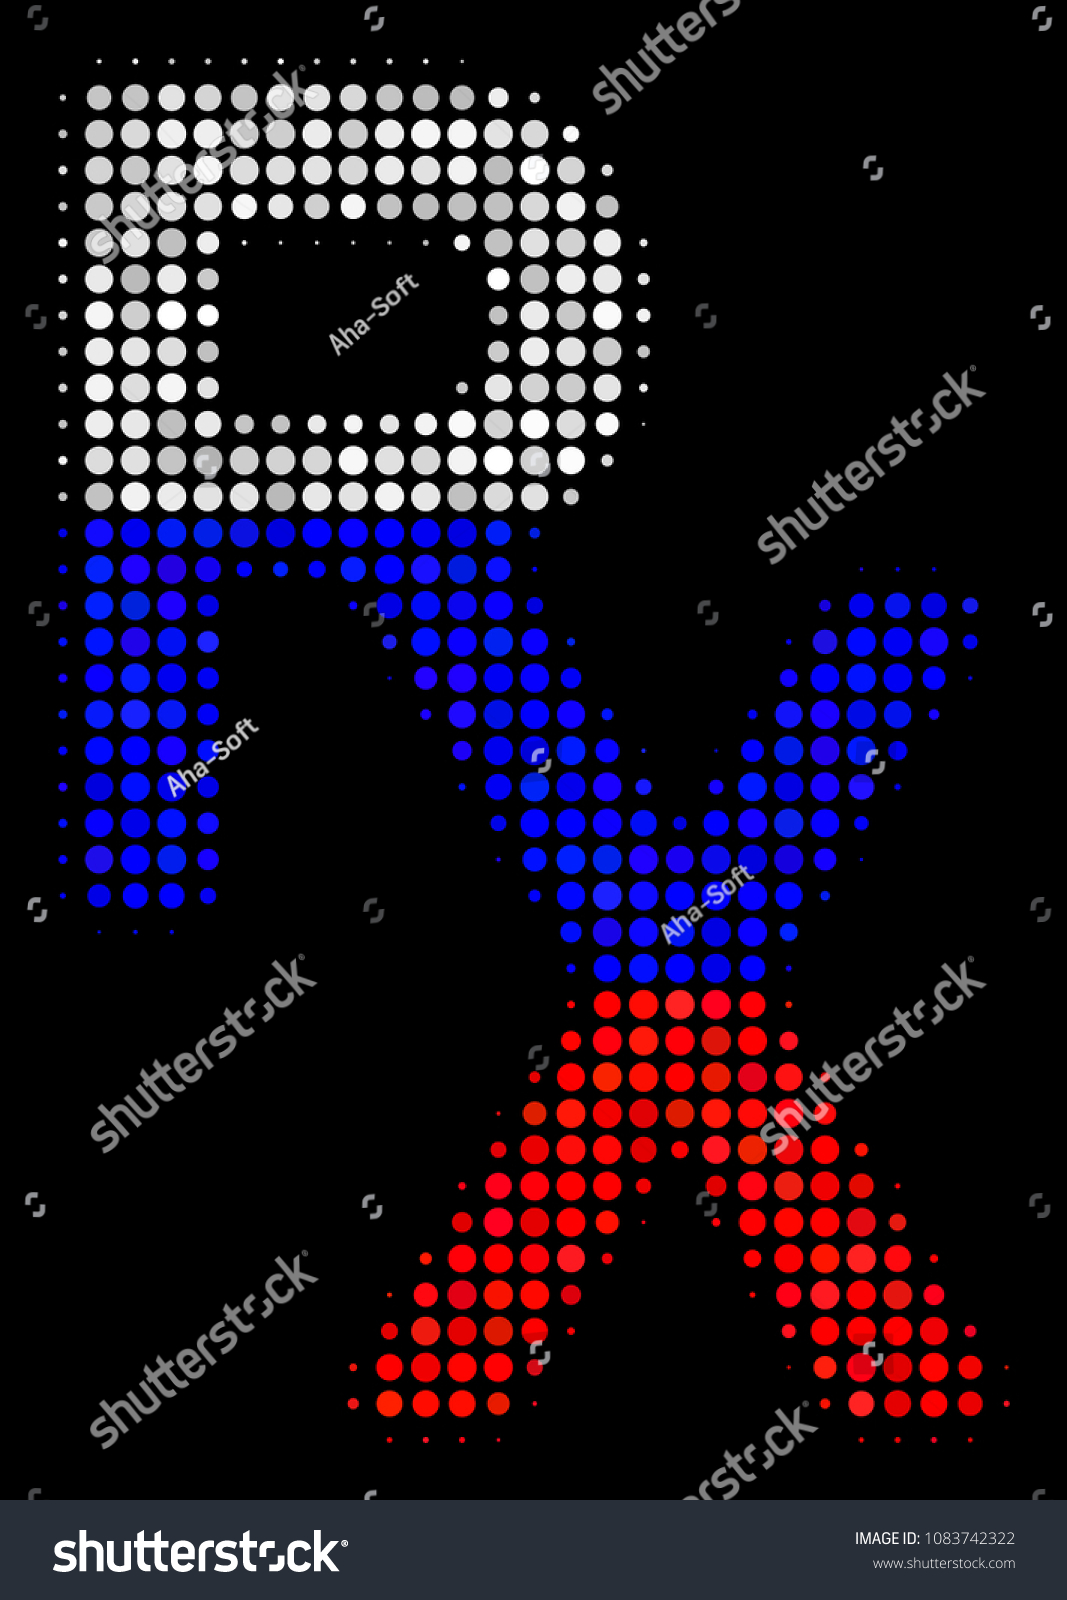 Halftone Rx Medical Symbol pictogram colored in Russia state flag colors on a dark background. Vector collage of Rx medical symbol icon constructed from circle pixels. #1083742322